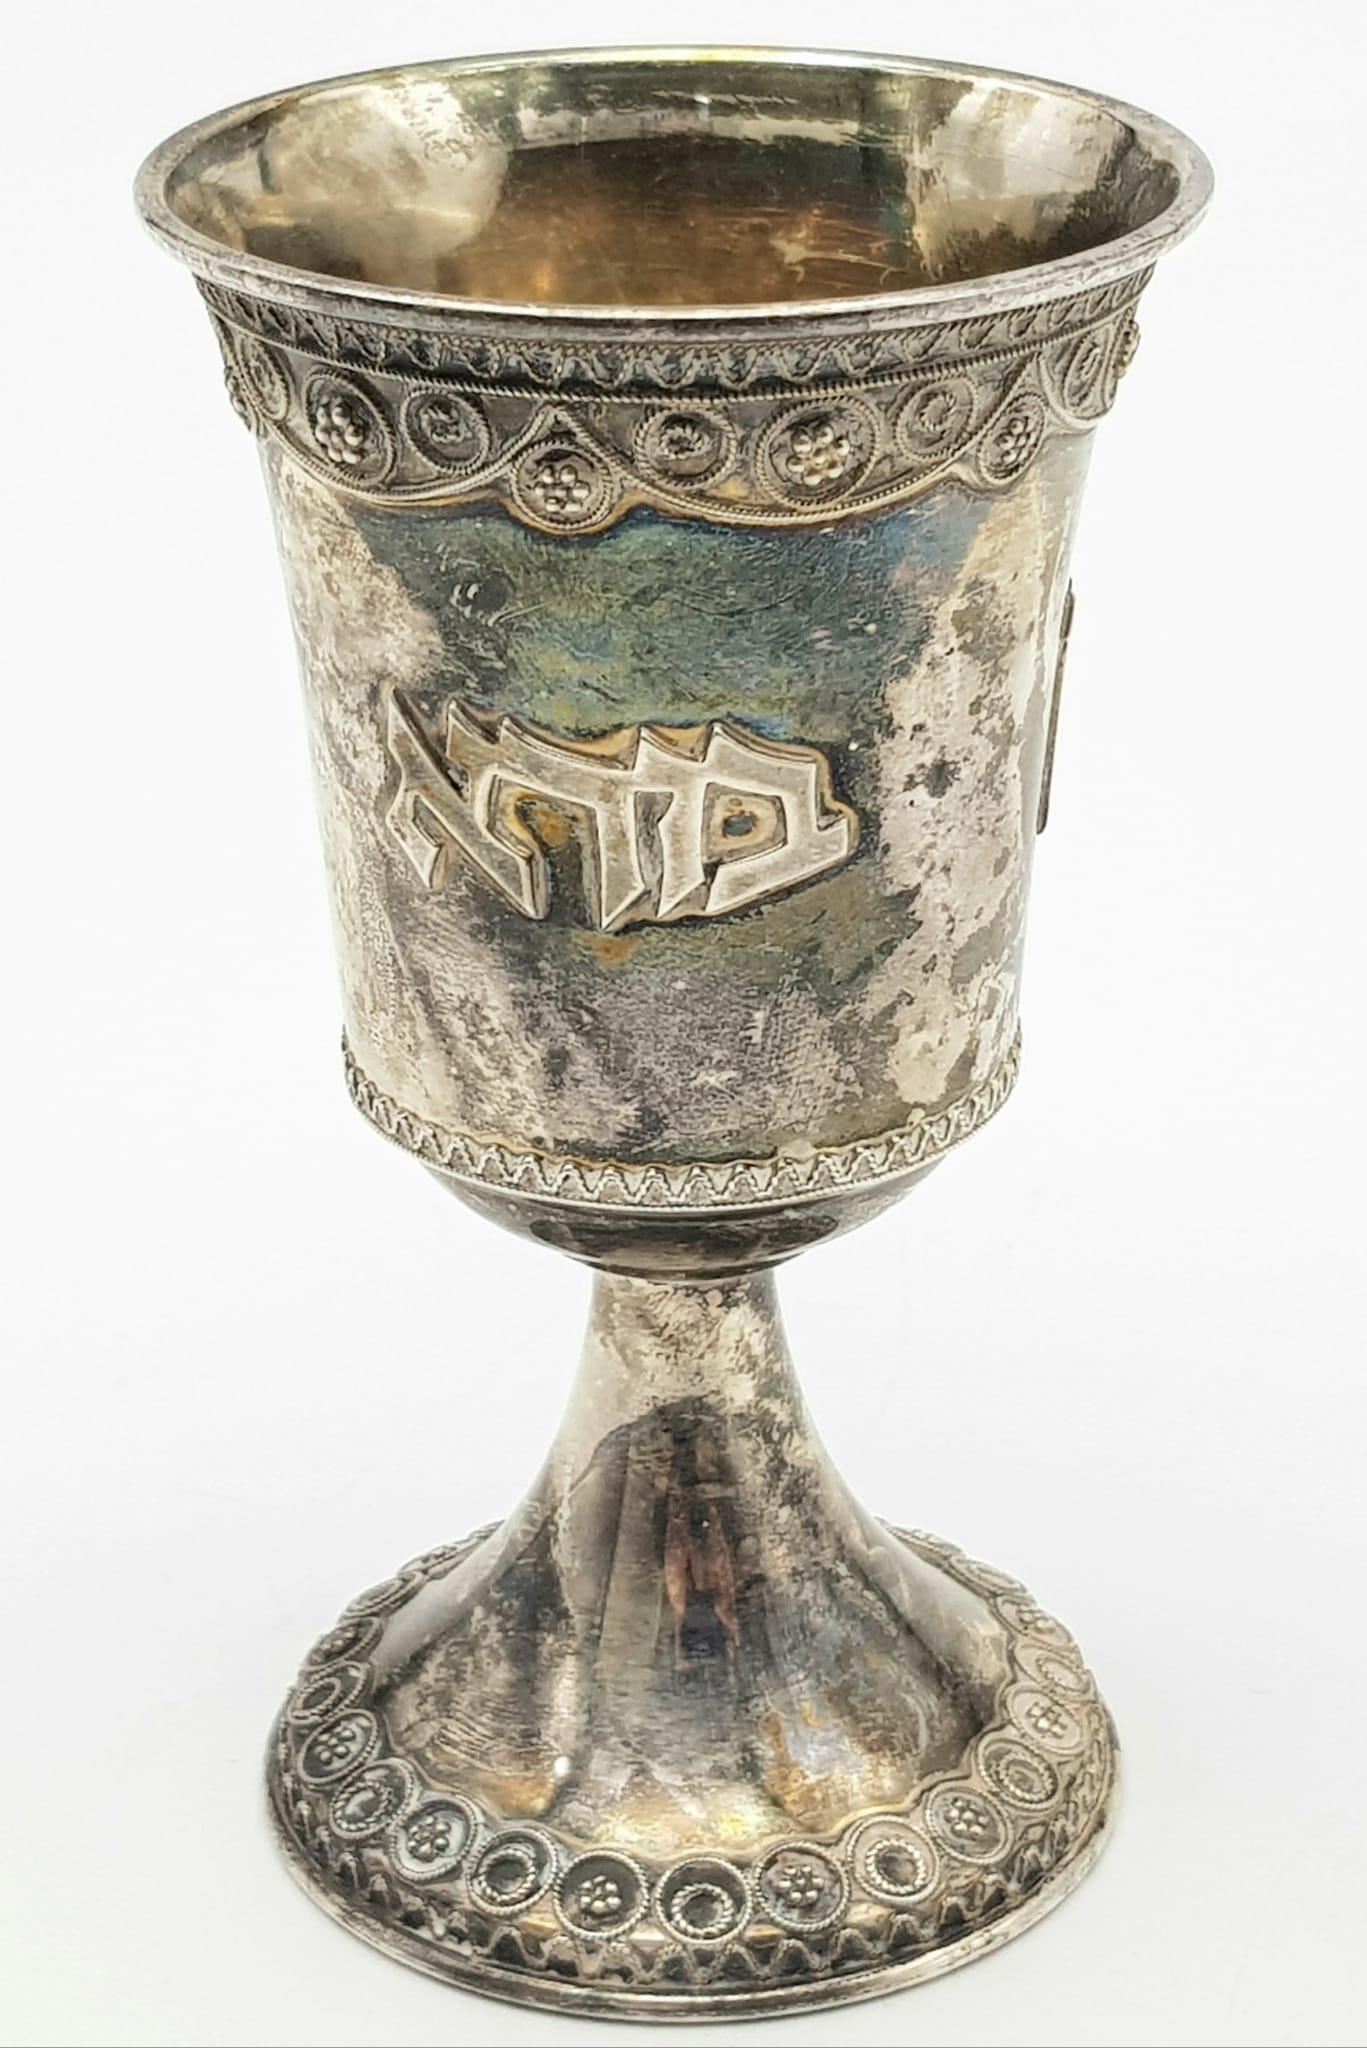 A SOLID SILVER KIDDISH CUP WITH THE BLESSING FOR WINE WRITTEN AROUND IT. 57.8gms 10cms TALL - Image 3 of 7